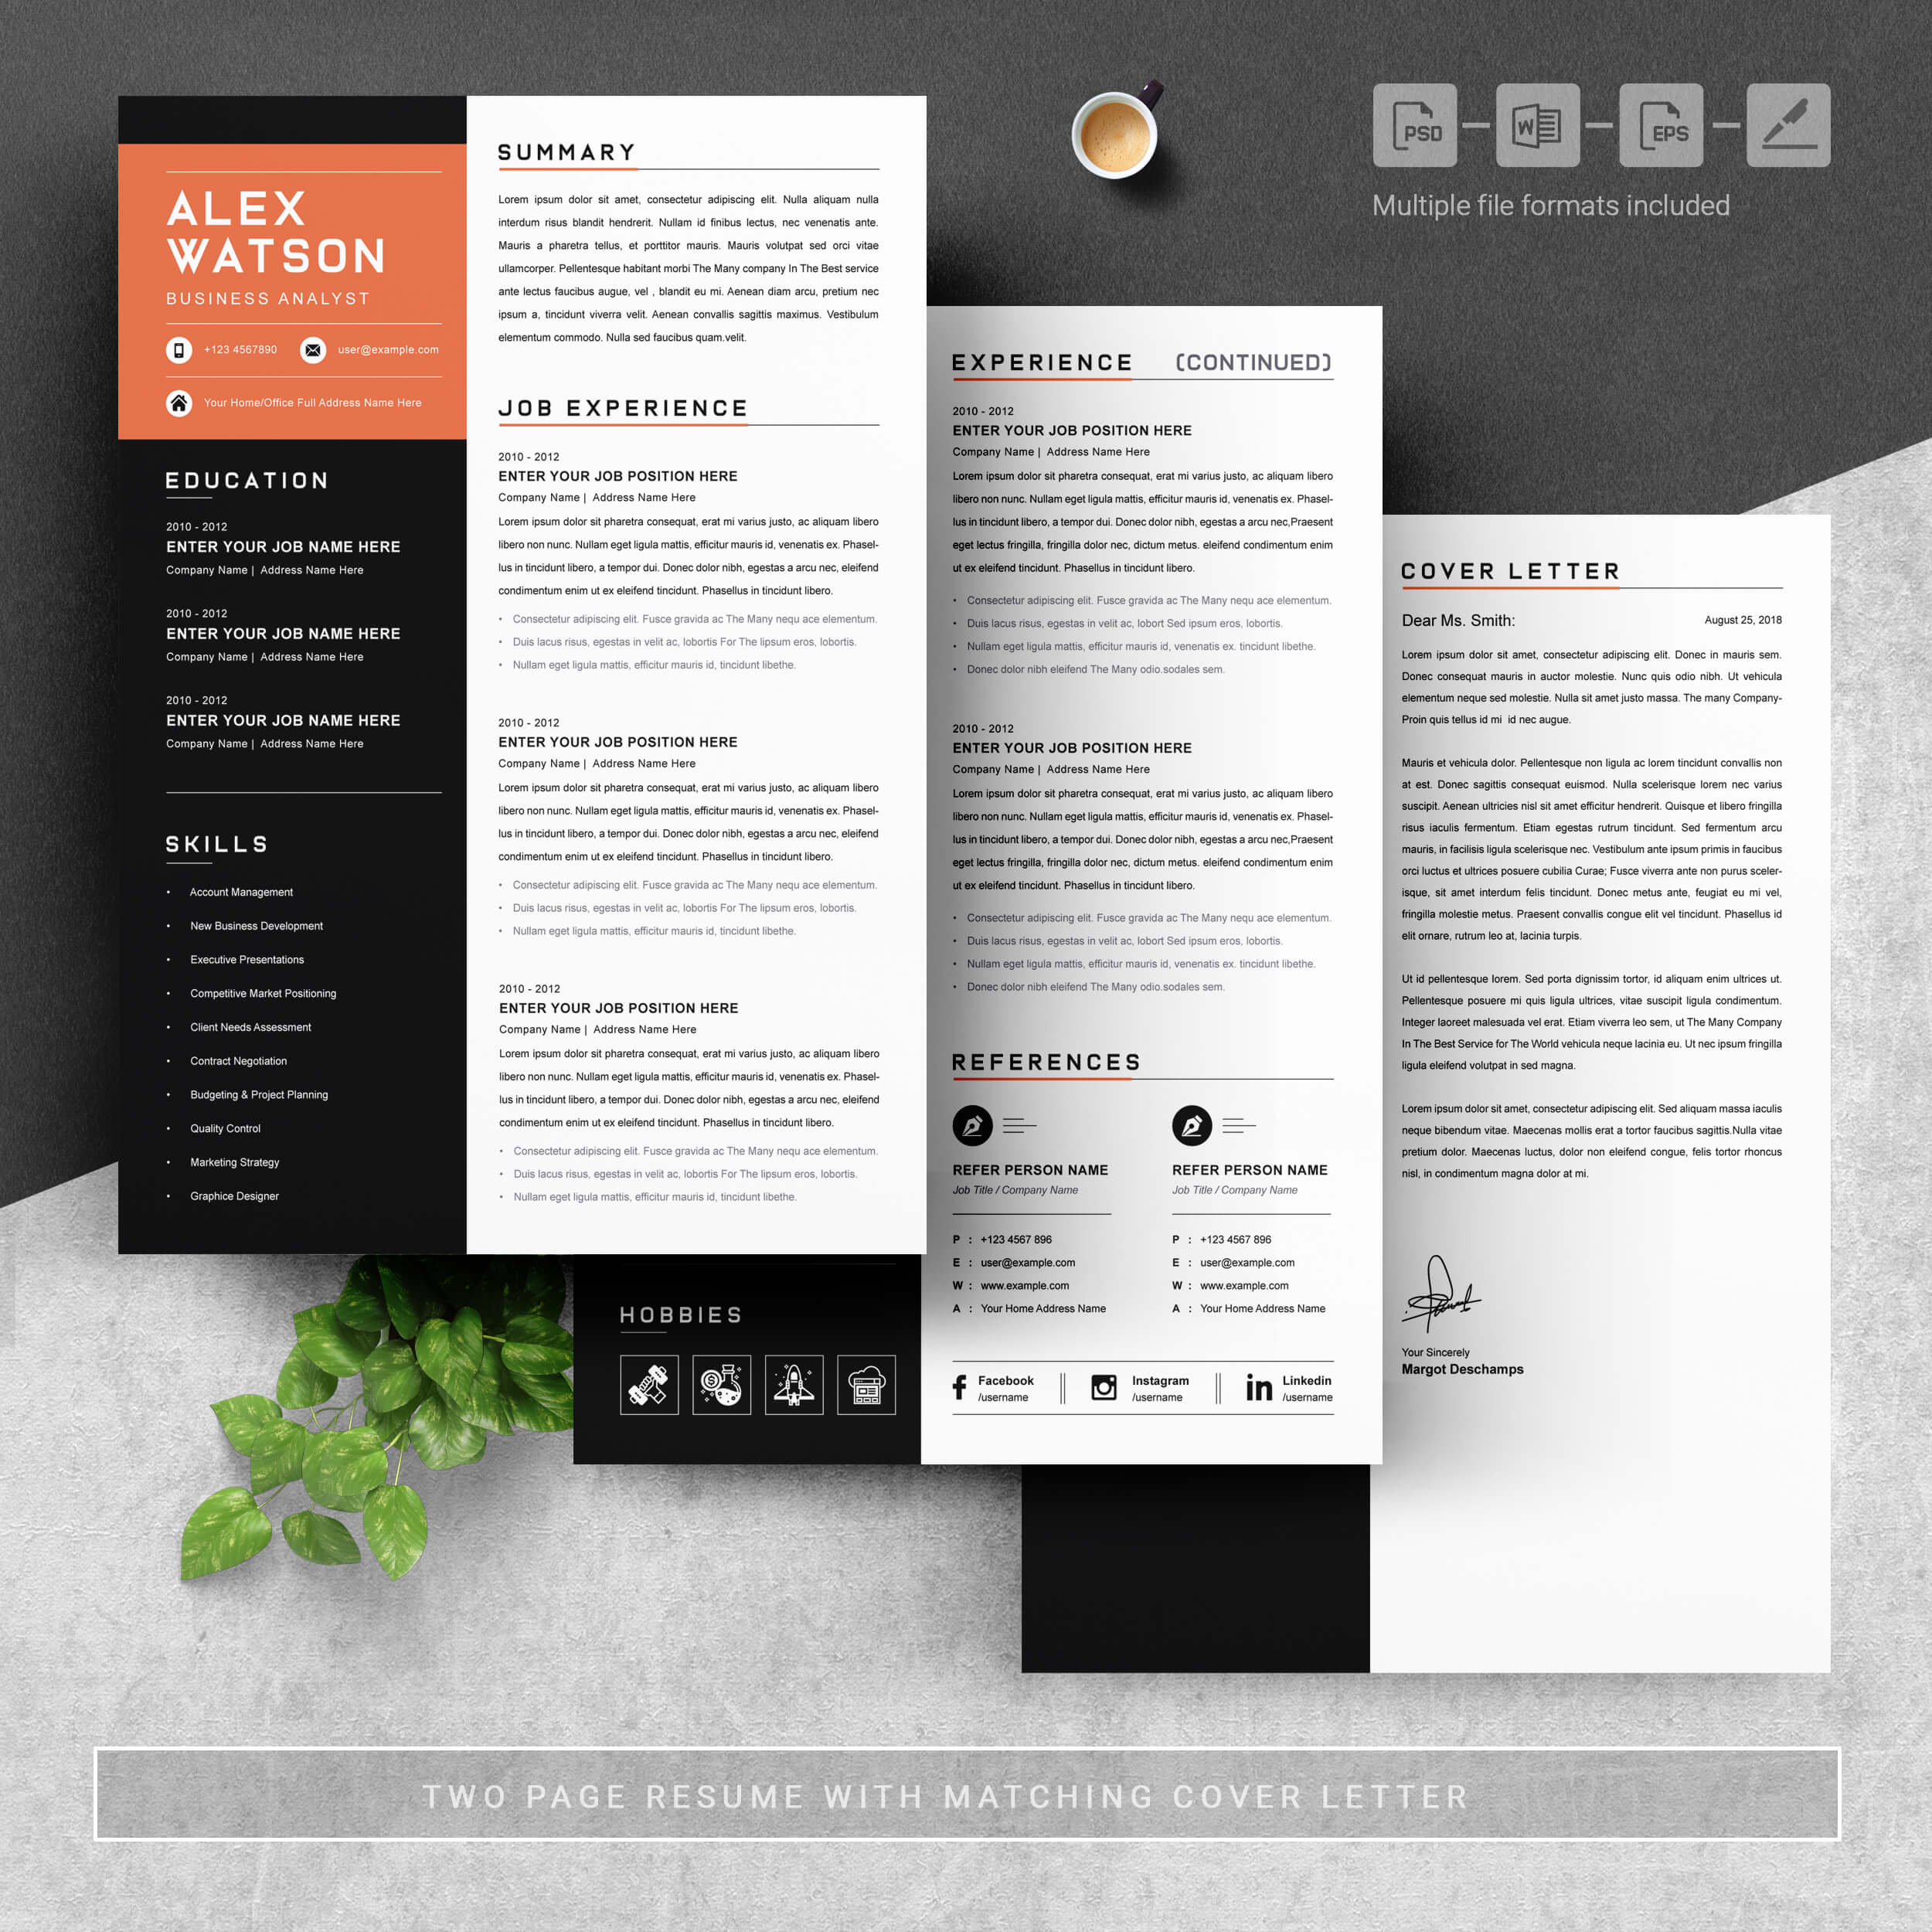 04 resume cover letter page free resume design template 4 451